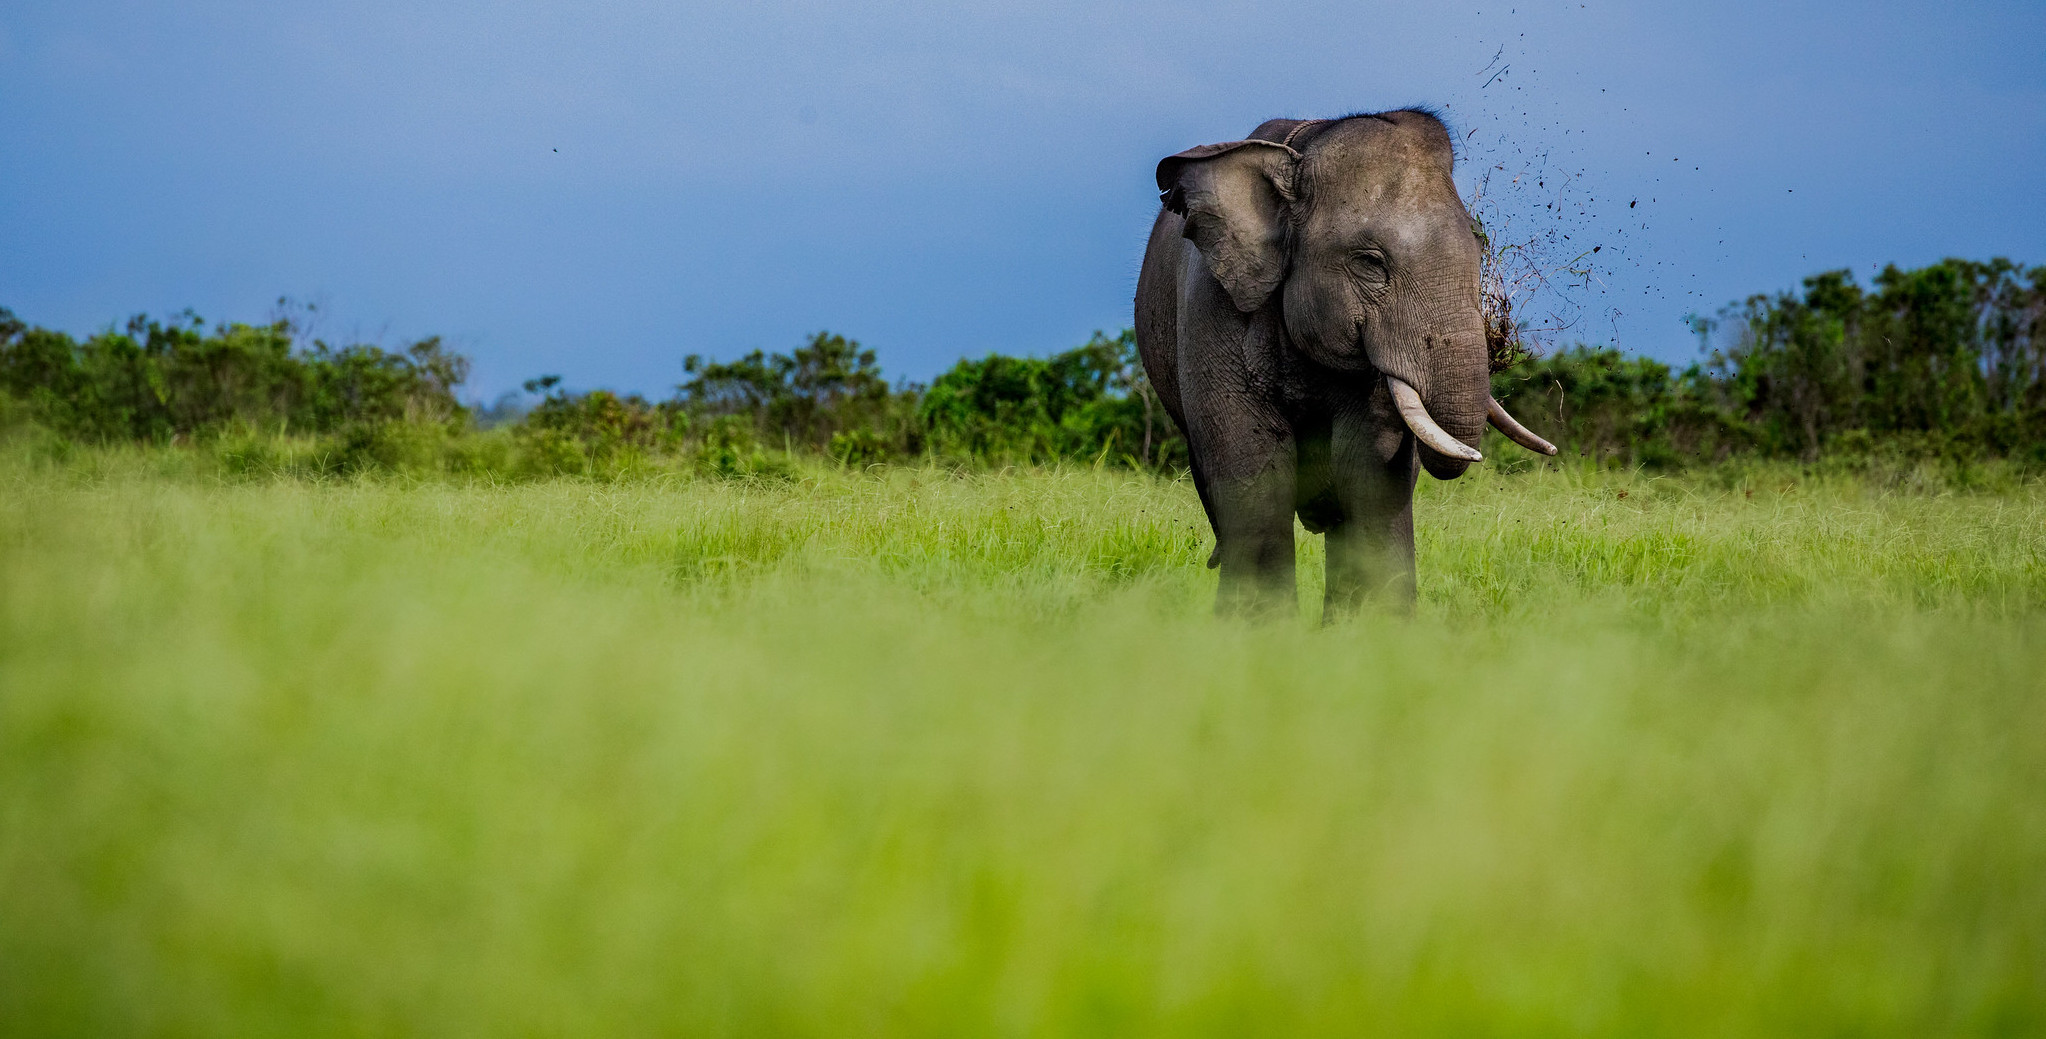 EARTH DAY: Can Sumatran elephants and people coexist?